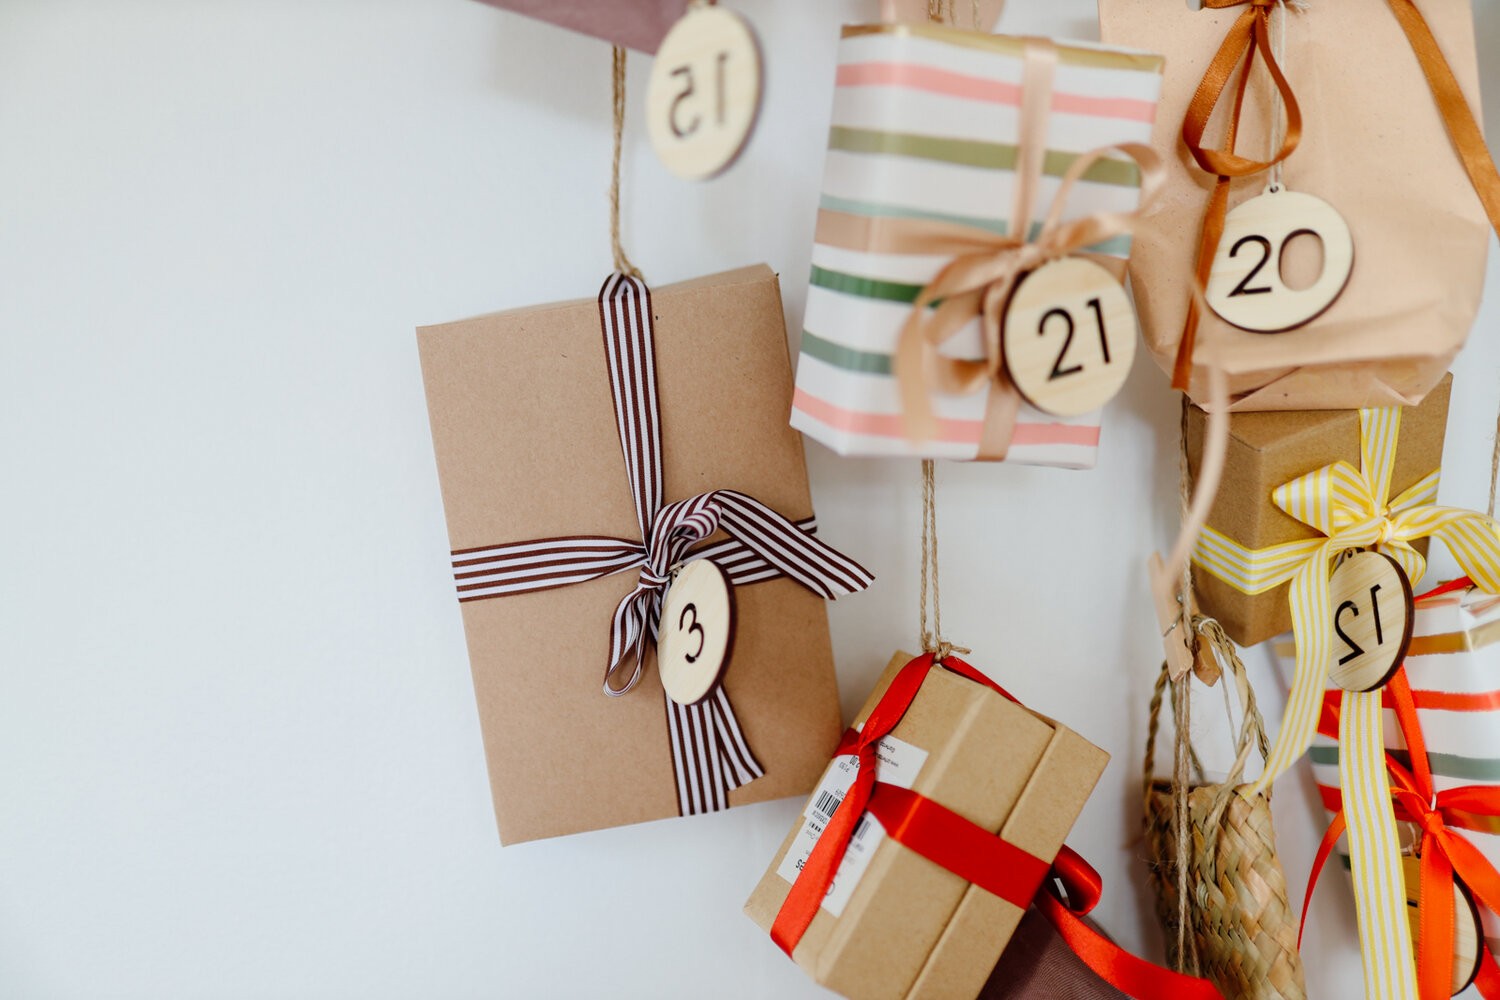 Labelled cardboard boxes are hung on the wall with beautiful ribbon wrapped around them.